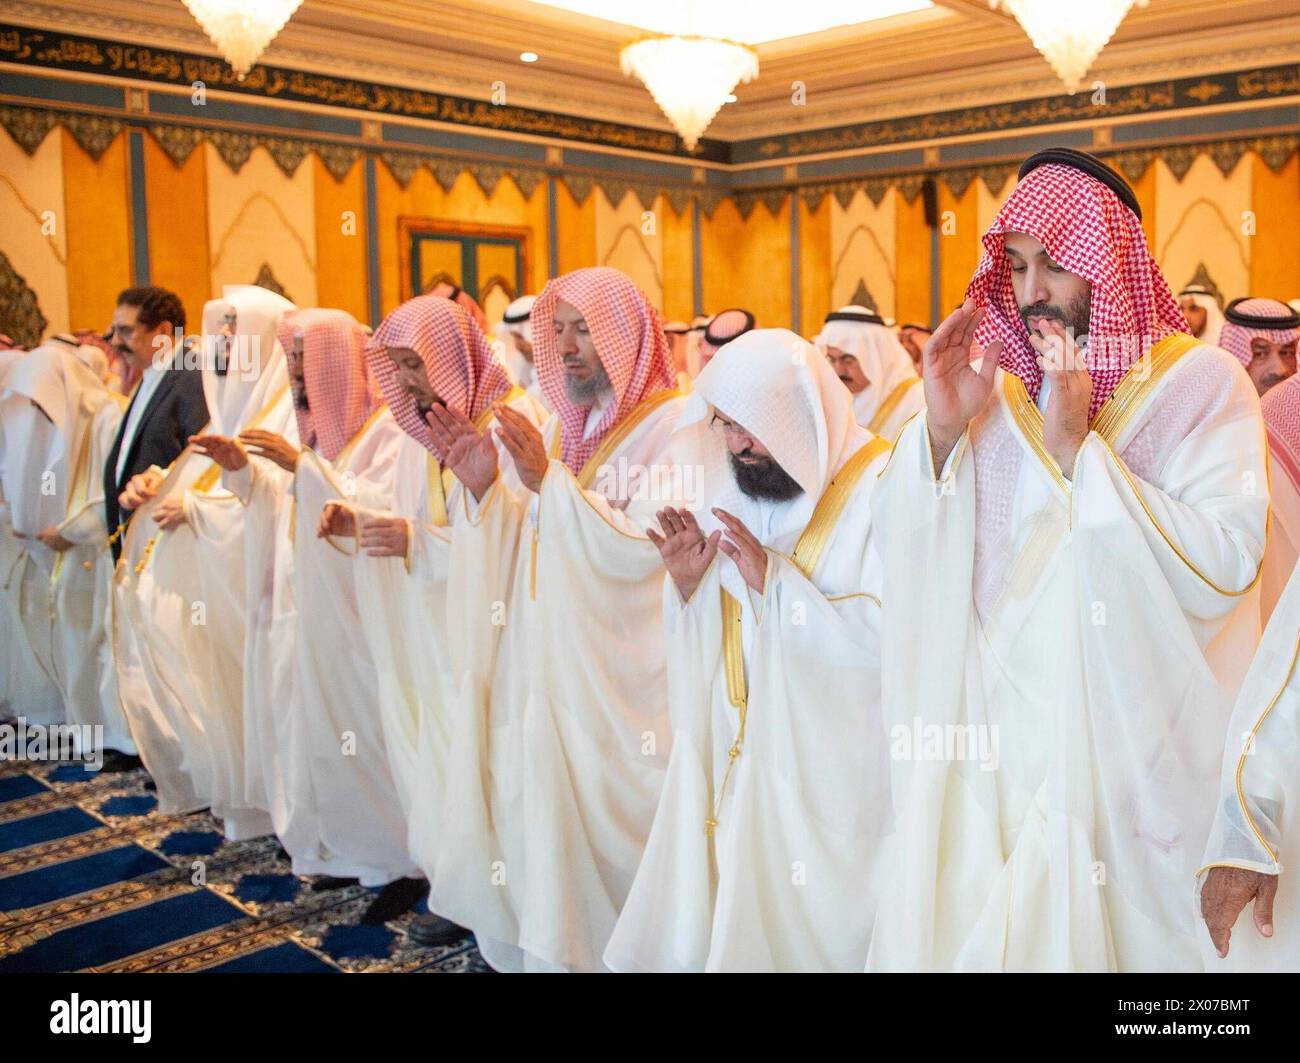 Saudi Crown Prince Mohammed bin Salman bin Abdulaziz Al Saud performs the blessed Eid al-Fitr prayer Saudi Crown Prince Mohammed bin Salman bin Abdulaziz Al Saud performs the blessed Eid al-Fitr prayer with the crowds of worshipers in the Grand Mosque, and receives princes, scholars, sheikhs and senior officials who offered congratulations on the occasion of the blessed Eid al-Fitr, Saudi Arabia, on April 10, 2024. Photo by Saudi Press Agency Saudi Arabia 100424 Saudi Arabia SPA 009 Copyright: xapaimagesxSaudixPressxAgencyxxapaimagesx Stock Photo